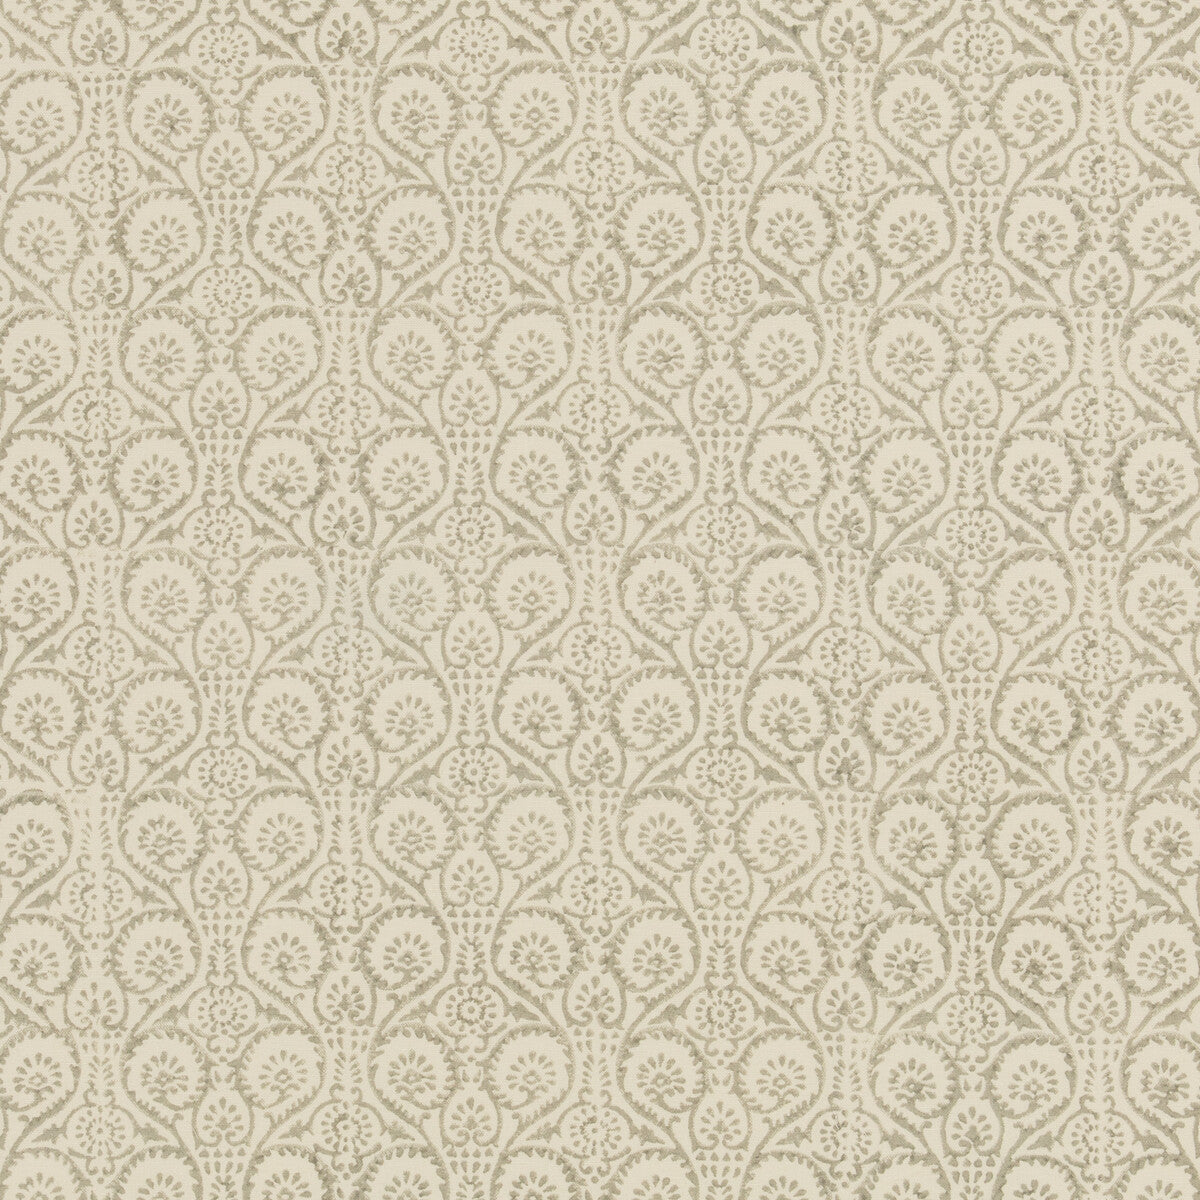 Pollen Trail fabric in stone color - pattern PP50481.4.0 - by Baker Lifestyle in the Block Party collection